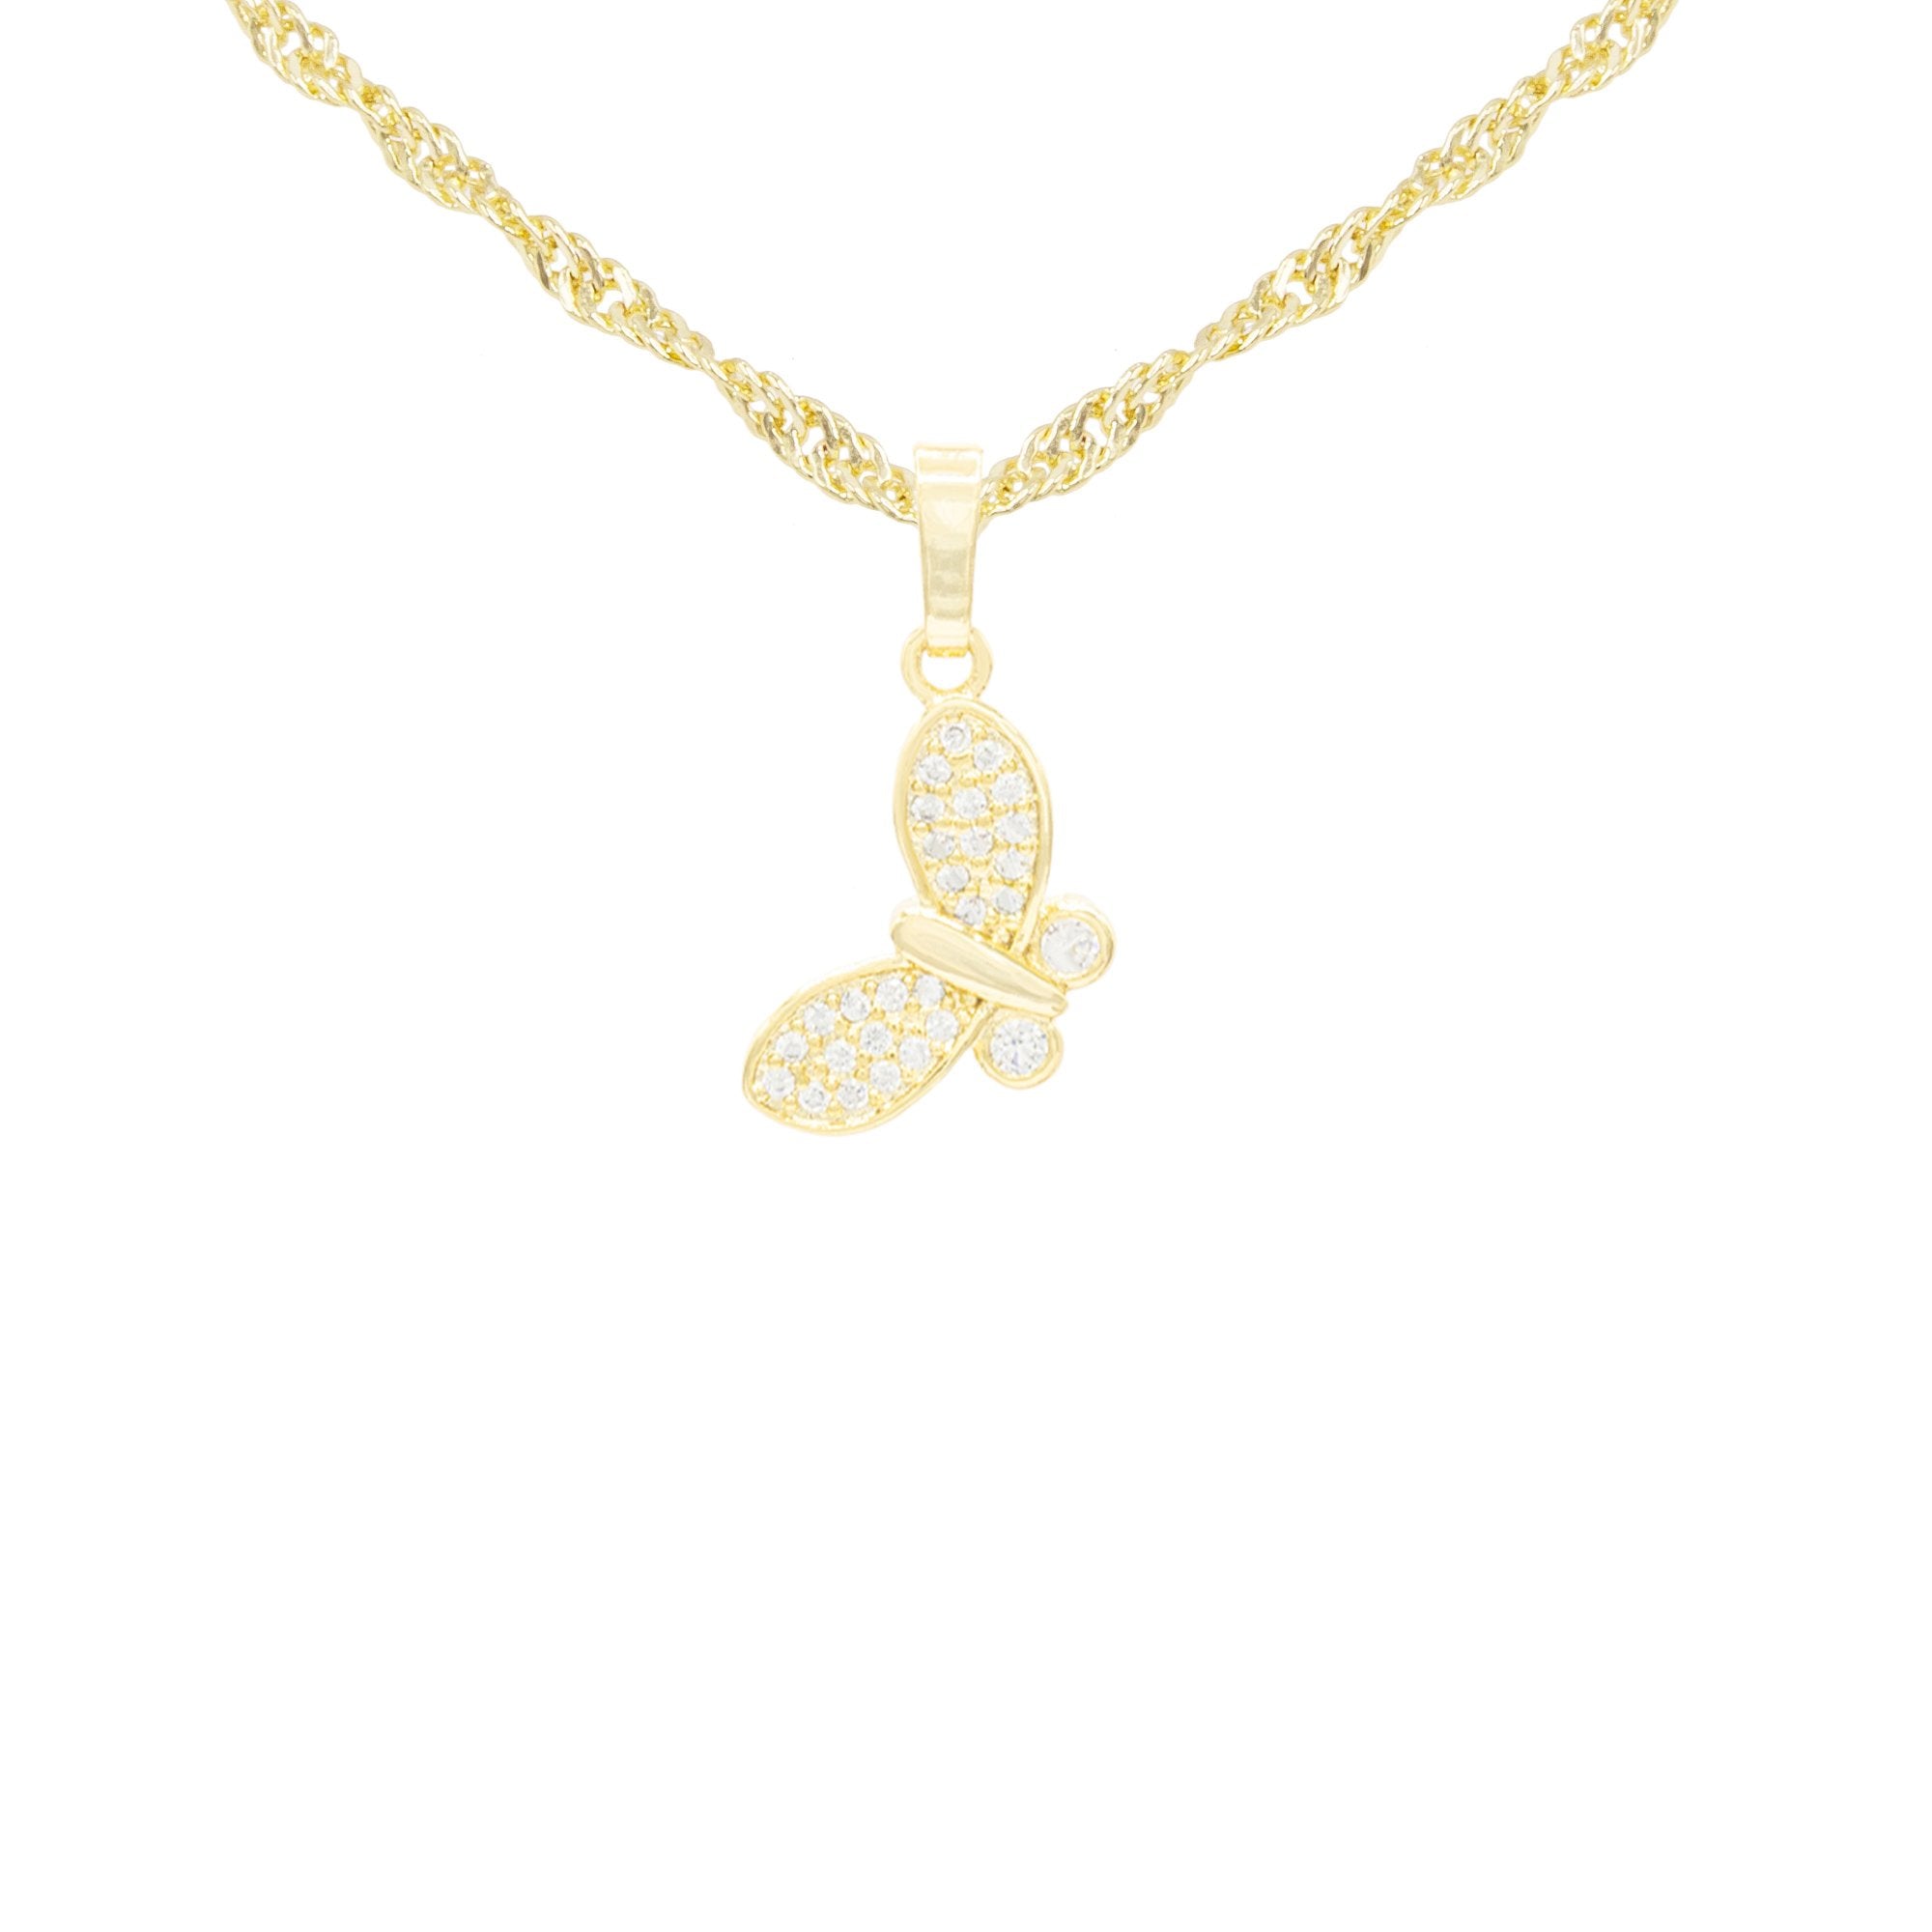 Flying Butterfly Cubic Zirconia Pendant With Necklace Set 14K Gold Filled